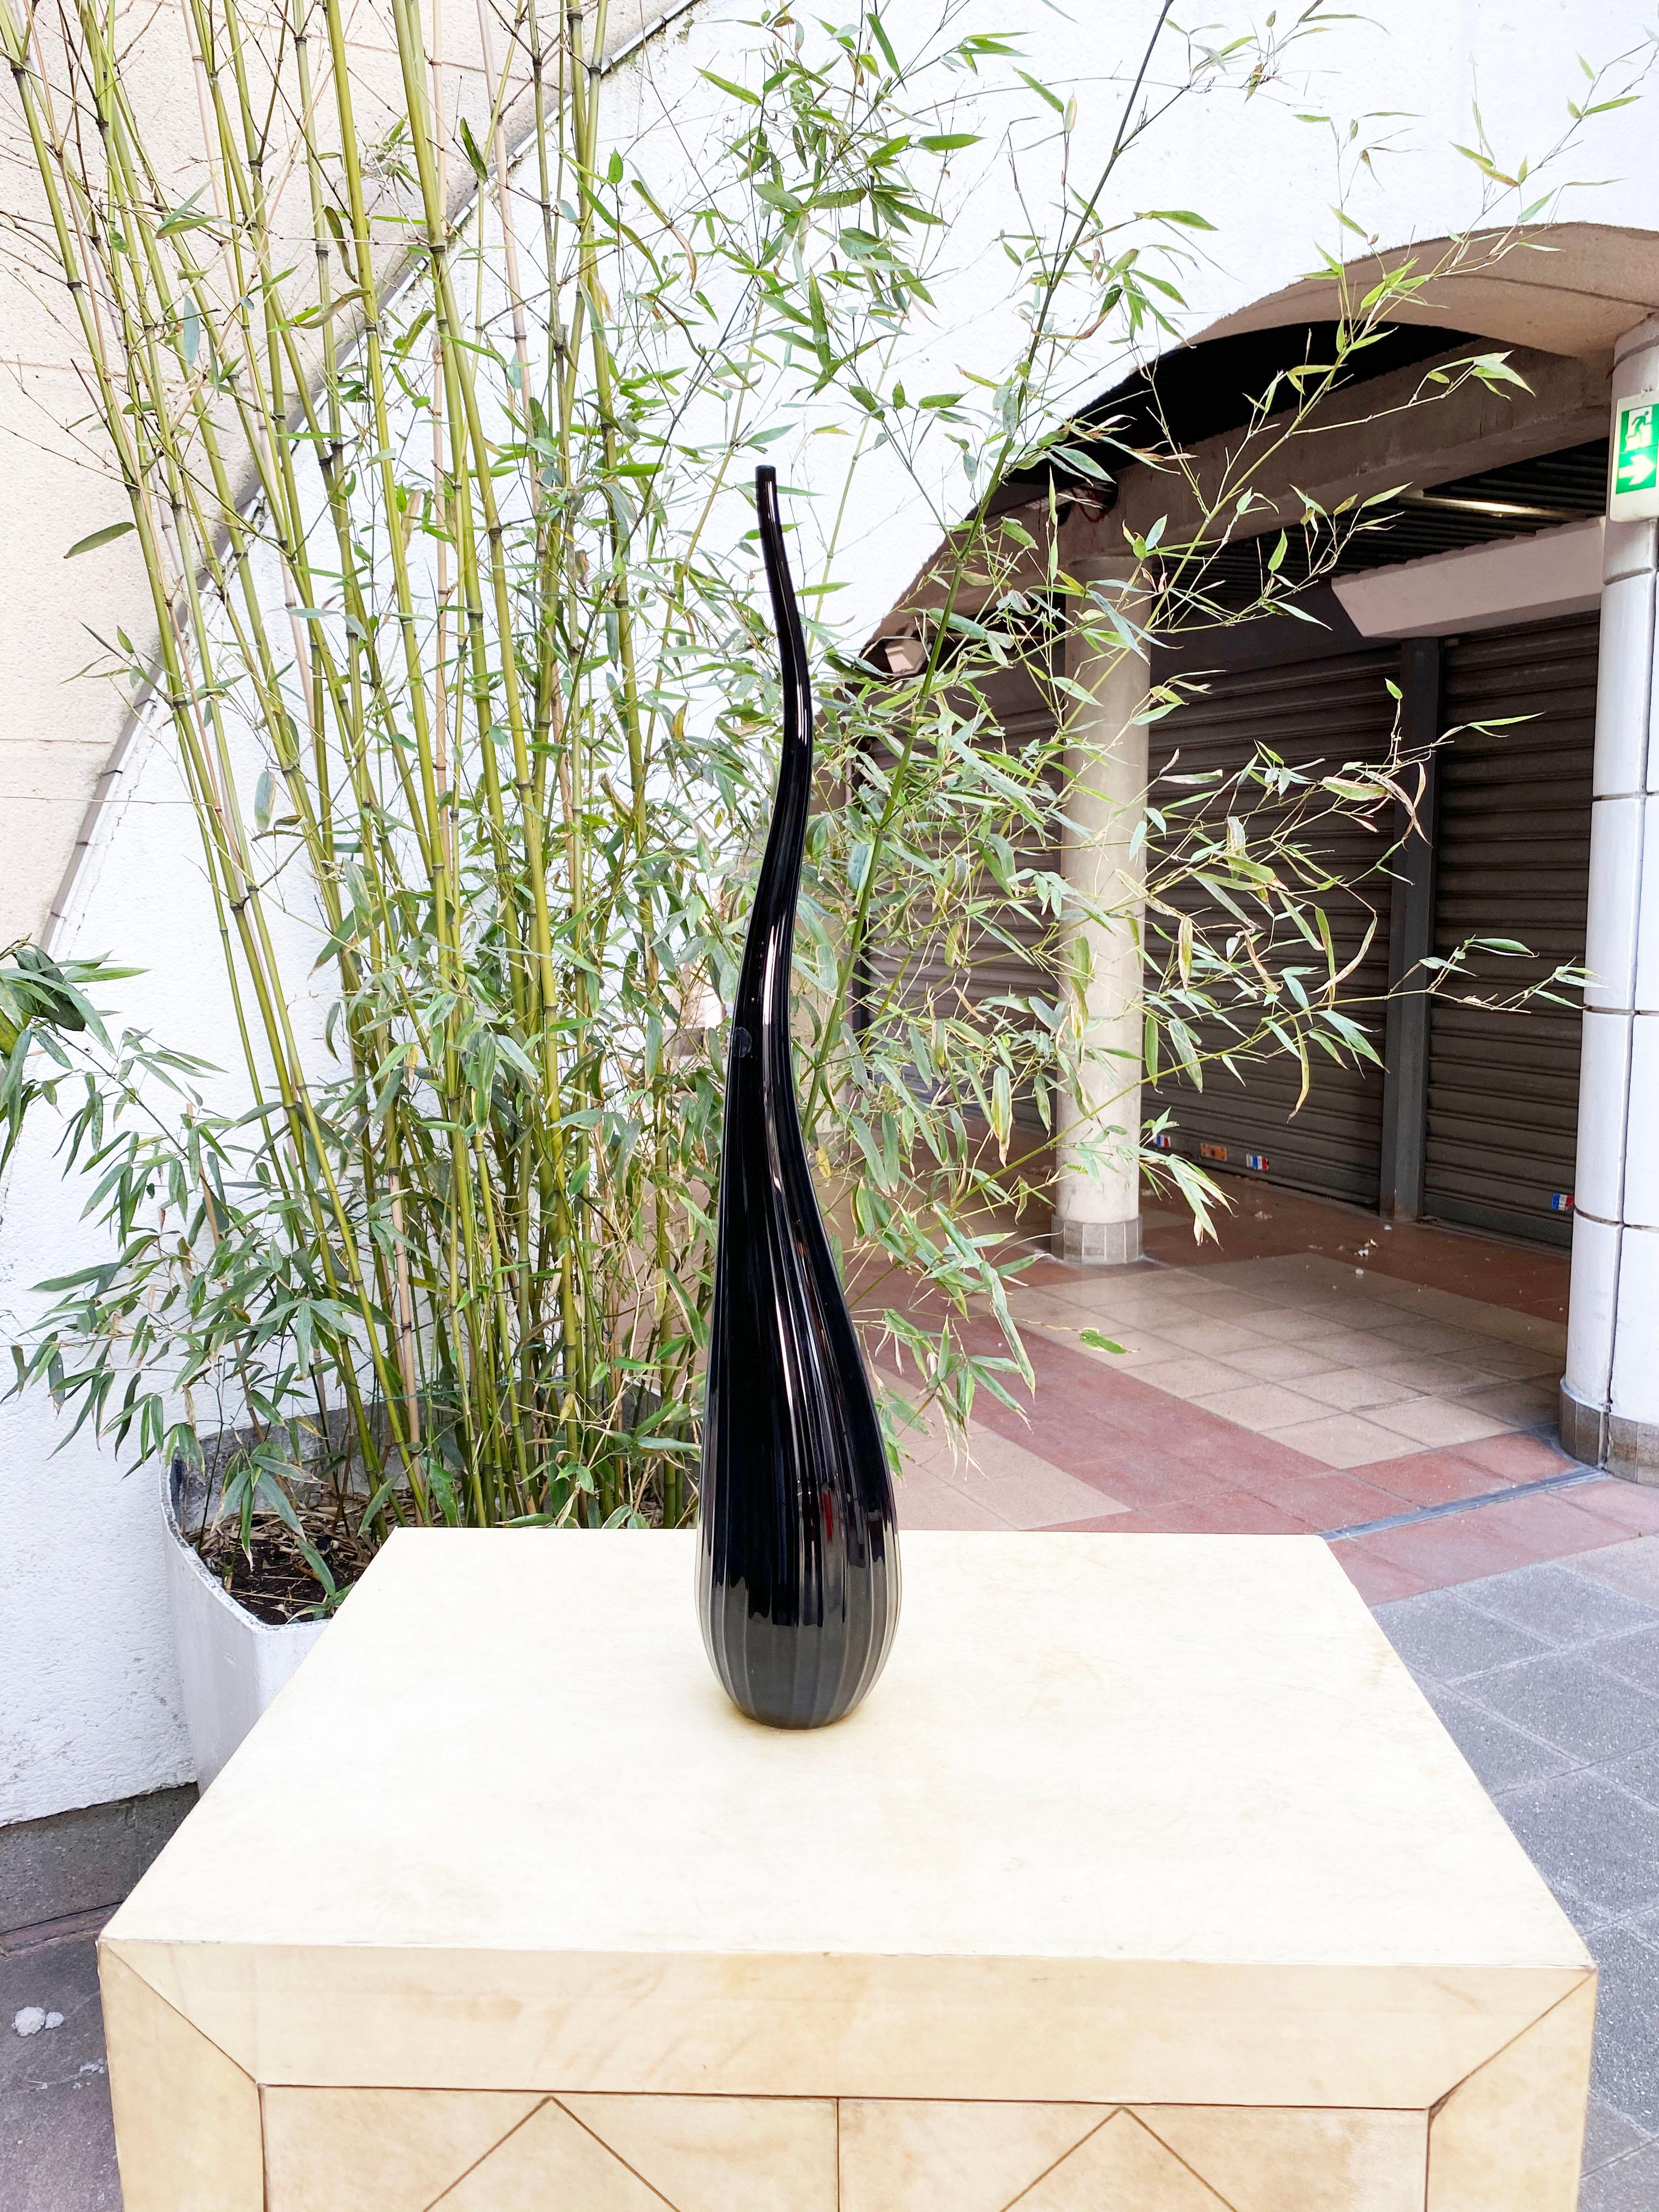 Salviati Murano
by Renzo Stellon
Aria model
1 soliflore vase model Aria
in black Murano glass
piriform in shape with a long, turbulent neck decorated with fine ribs
signed and dated 2009
1 of 55cms high
new in stock with its sticker
490